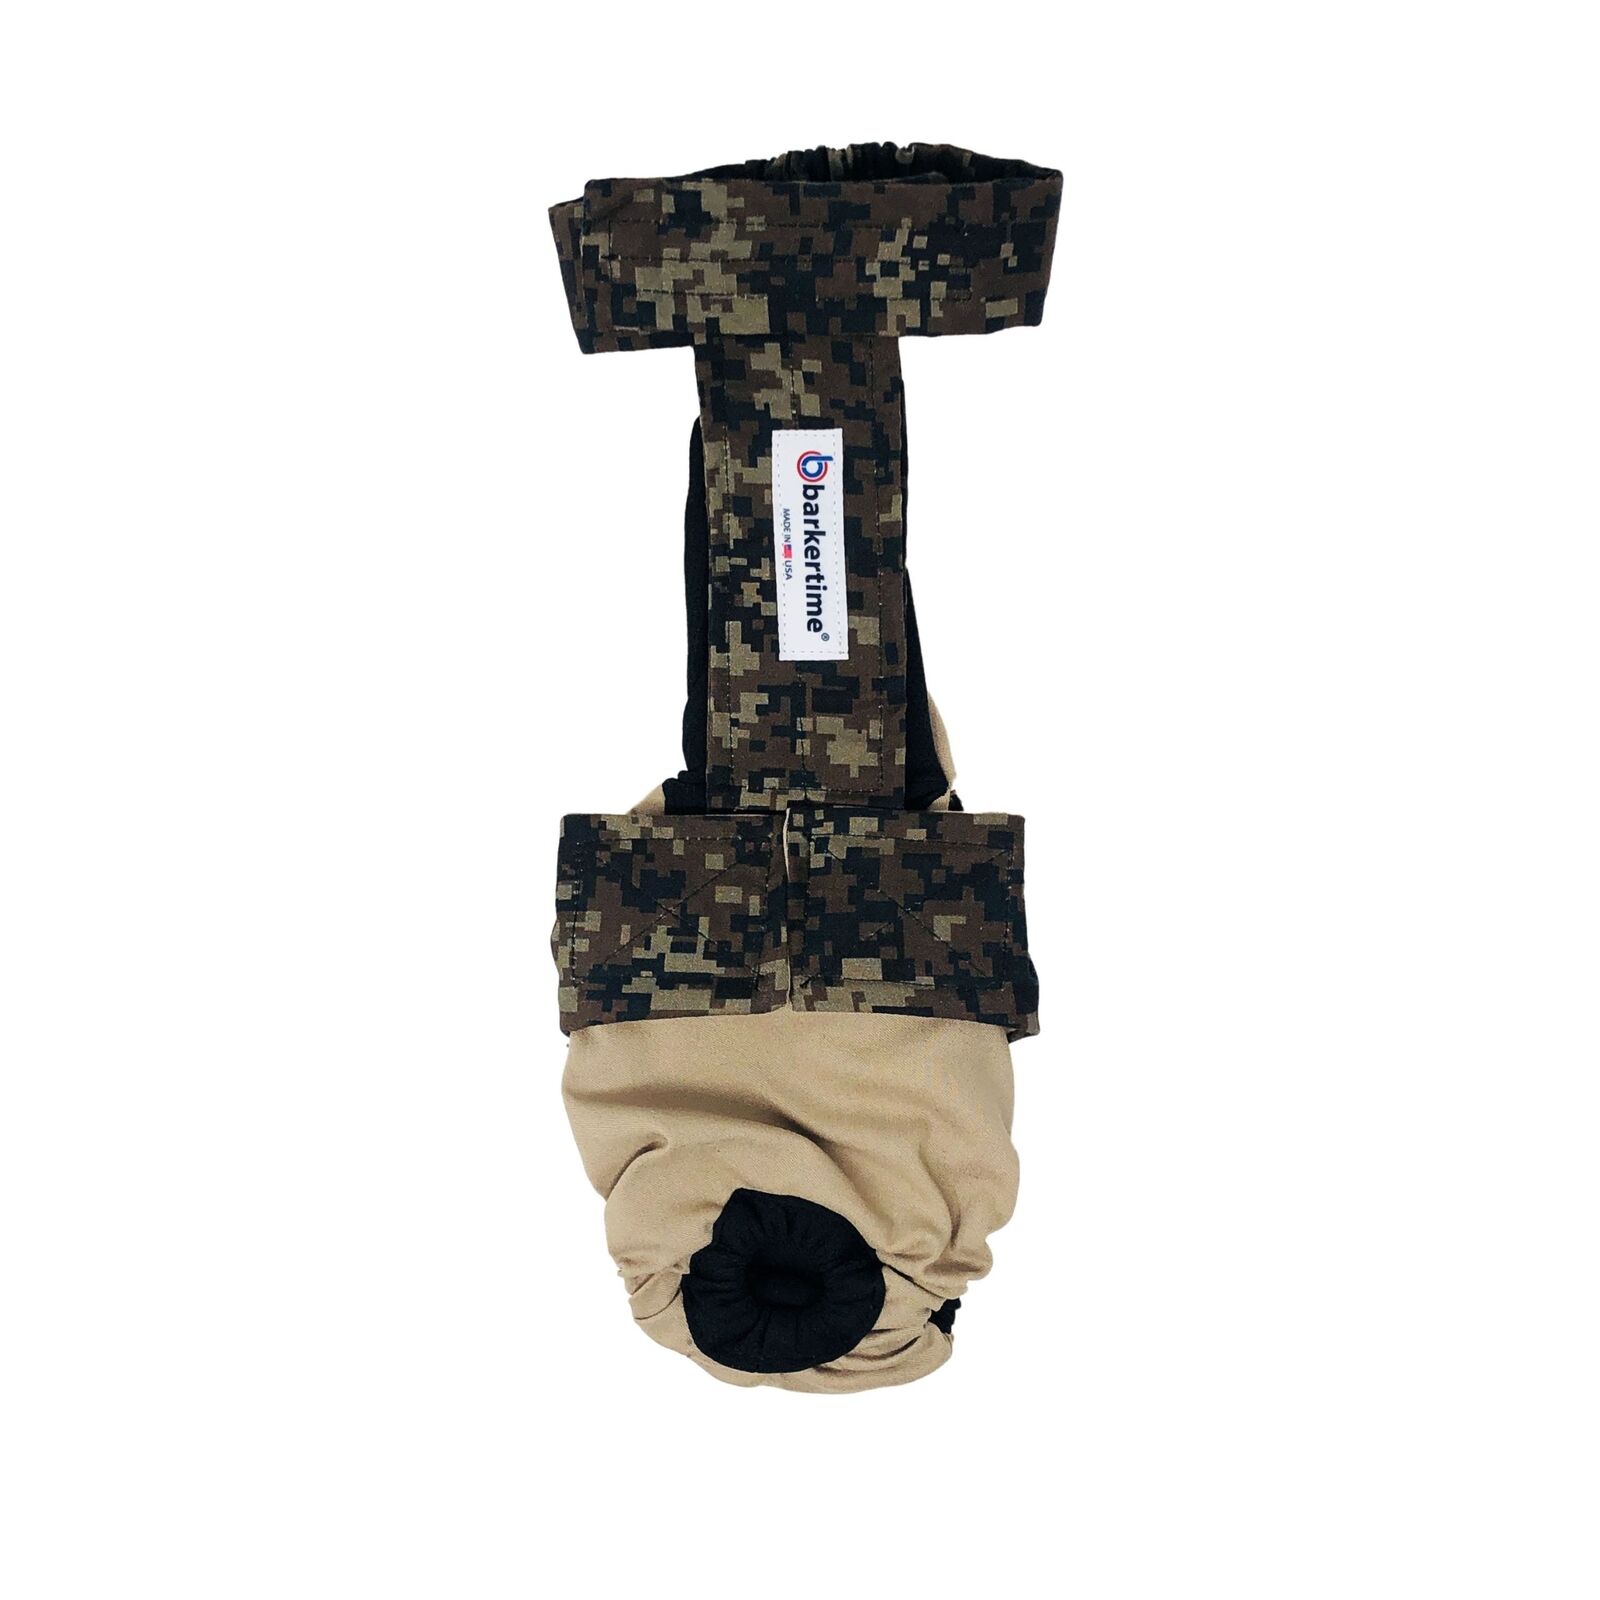 Dog Diaper Overall - Made in USA - Digital Camo on Beige Escape-Proof Waterpr...